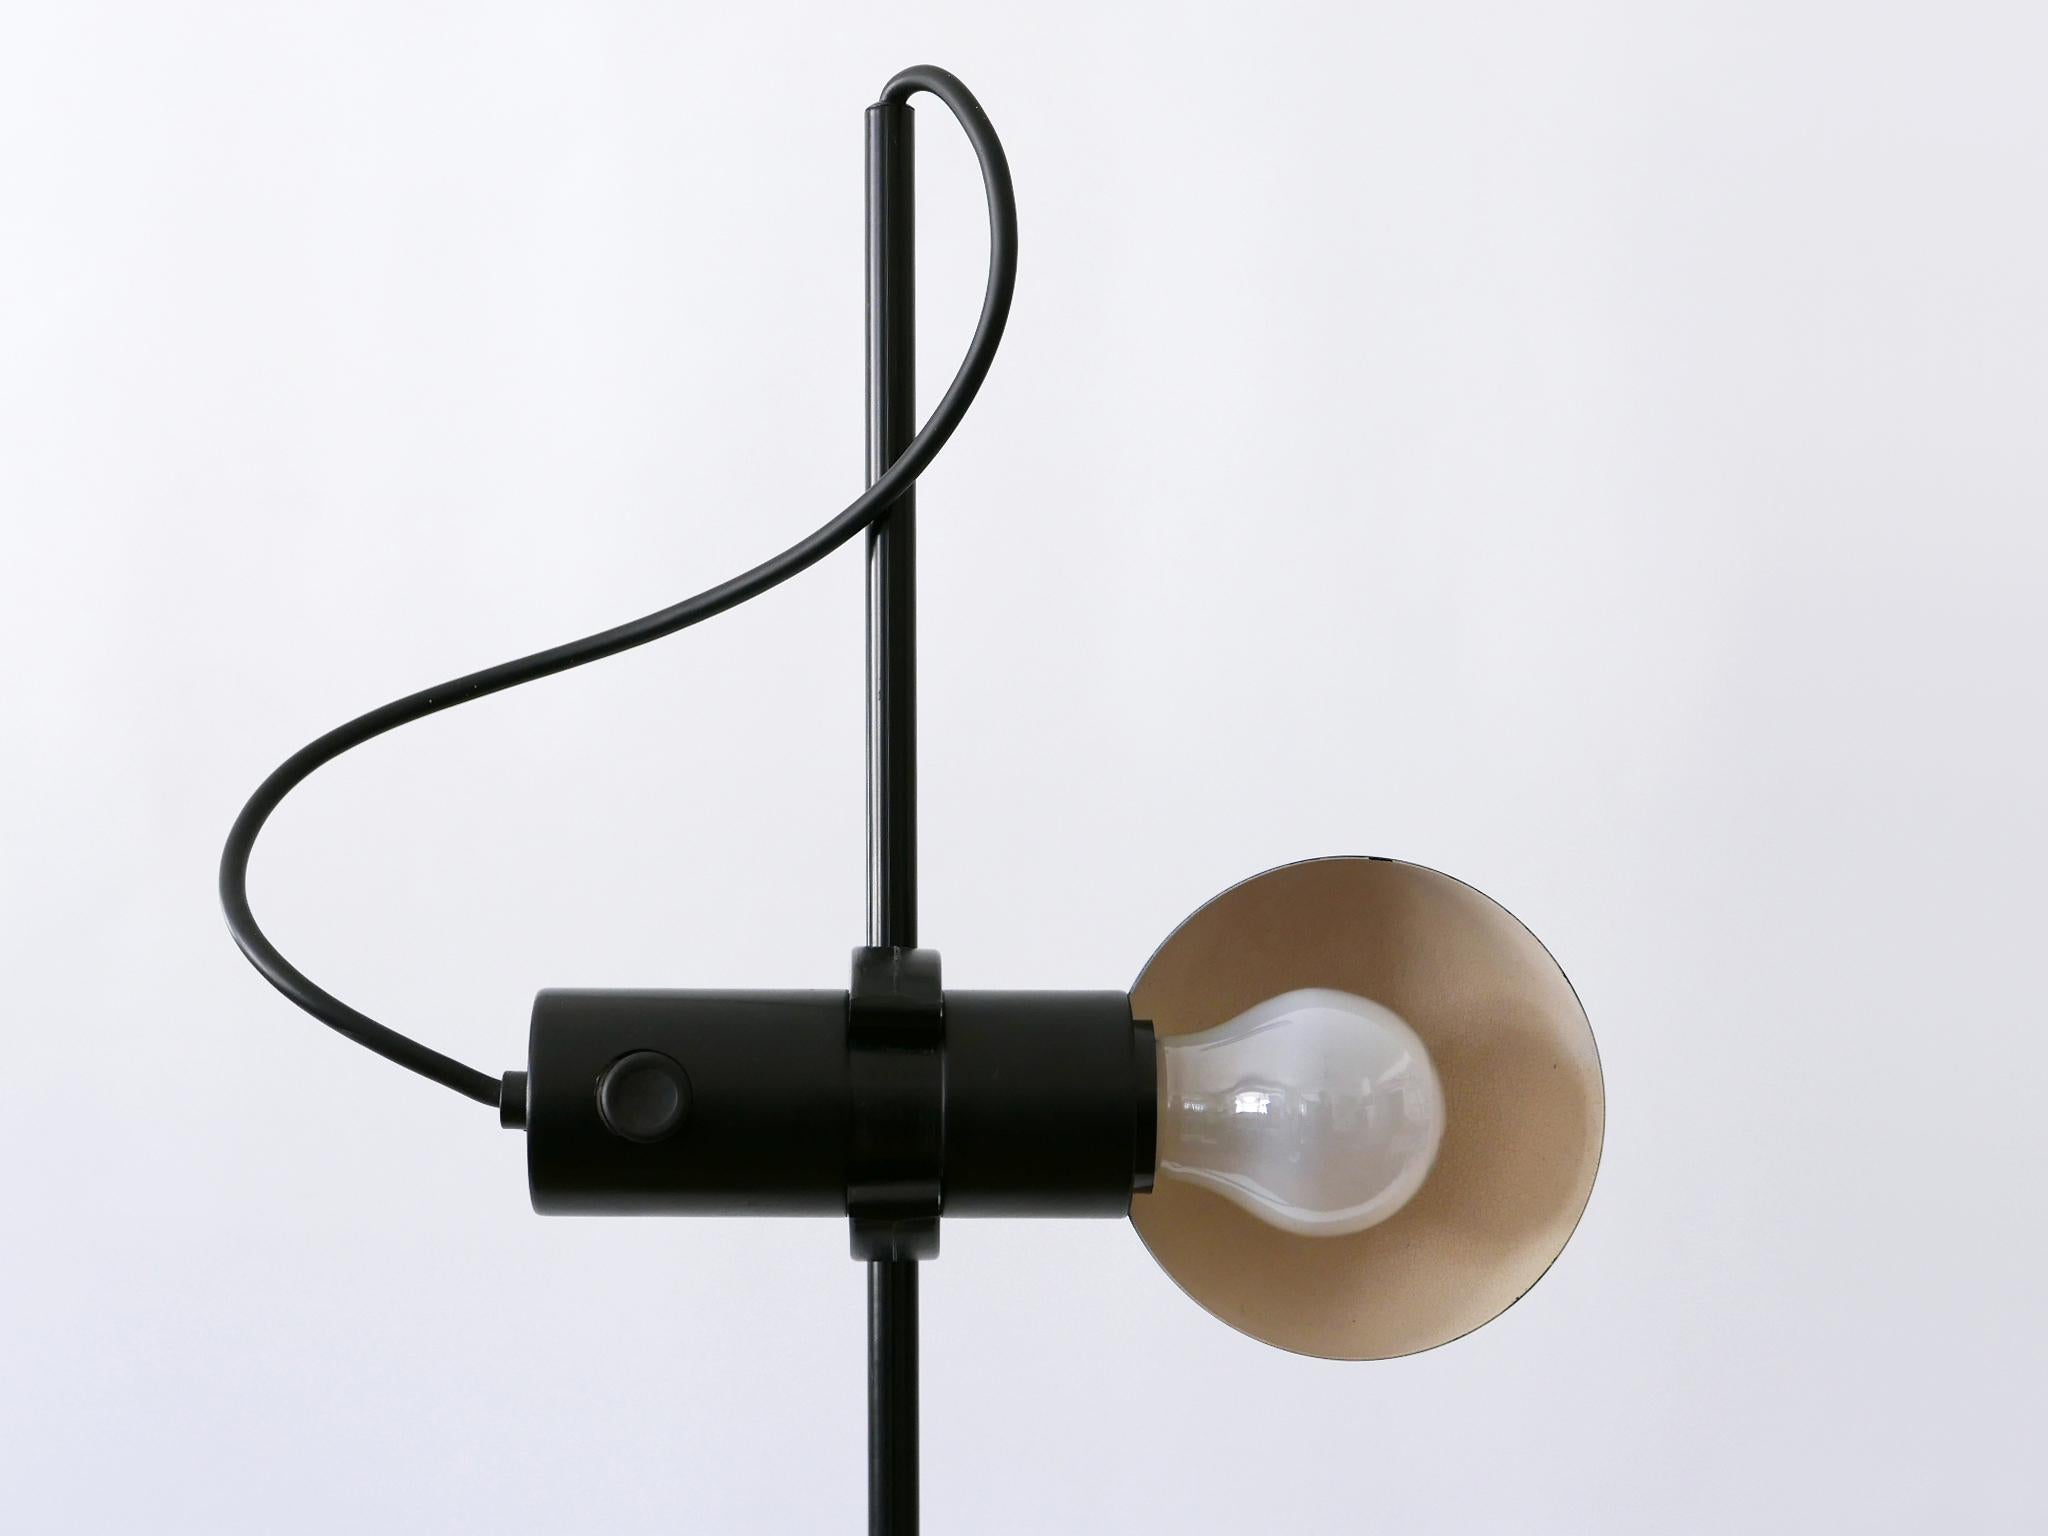 Metal Rare Floor Lamp or Reading Light by Barbieri e Marianelli for Tronconi 1970s For Sale